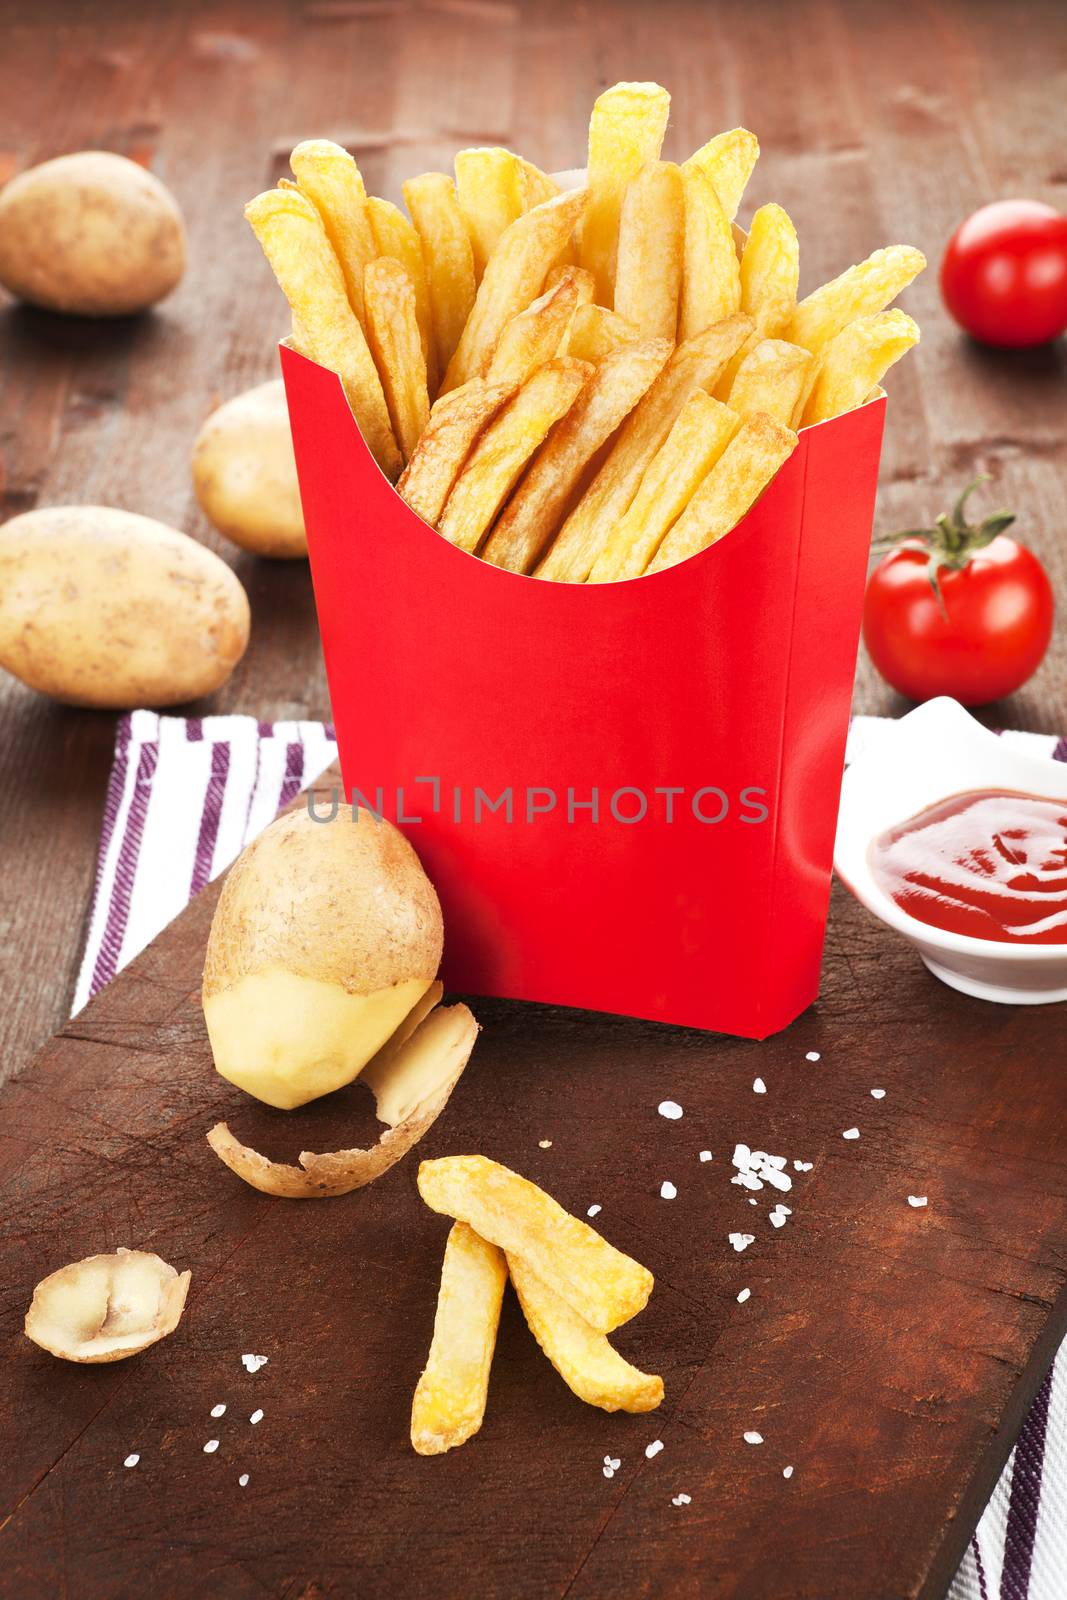 French fries in fast food paper bag. Potatoes, tomatoes and ketchup in background. Country style.